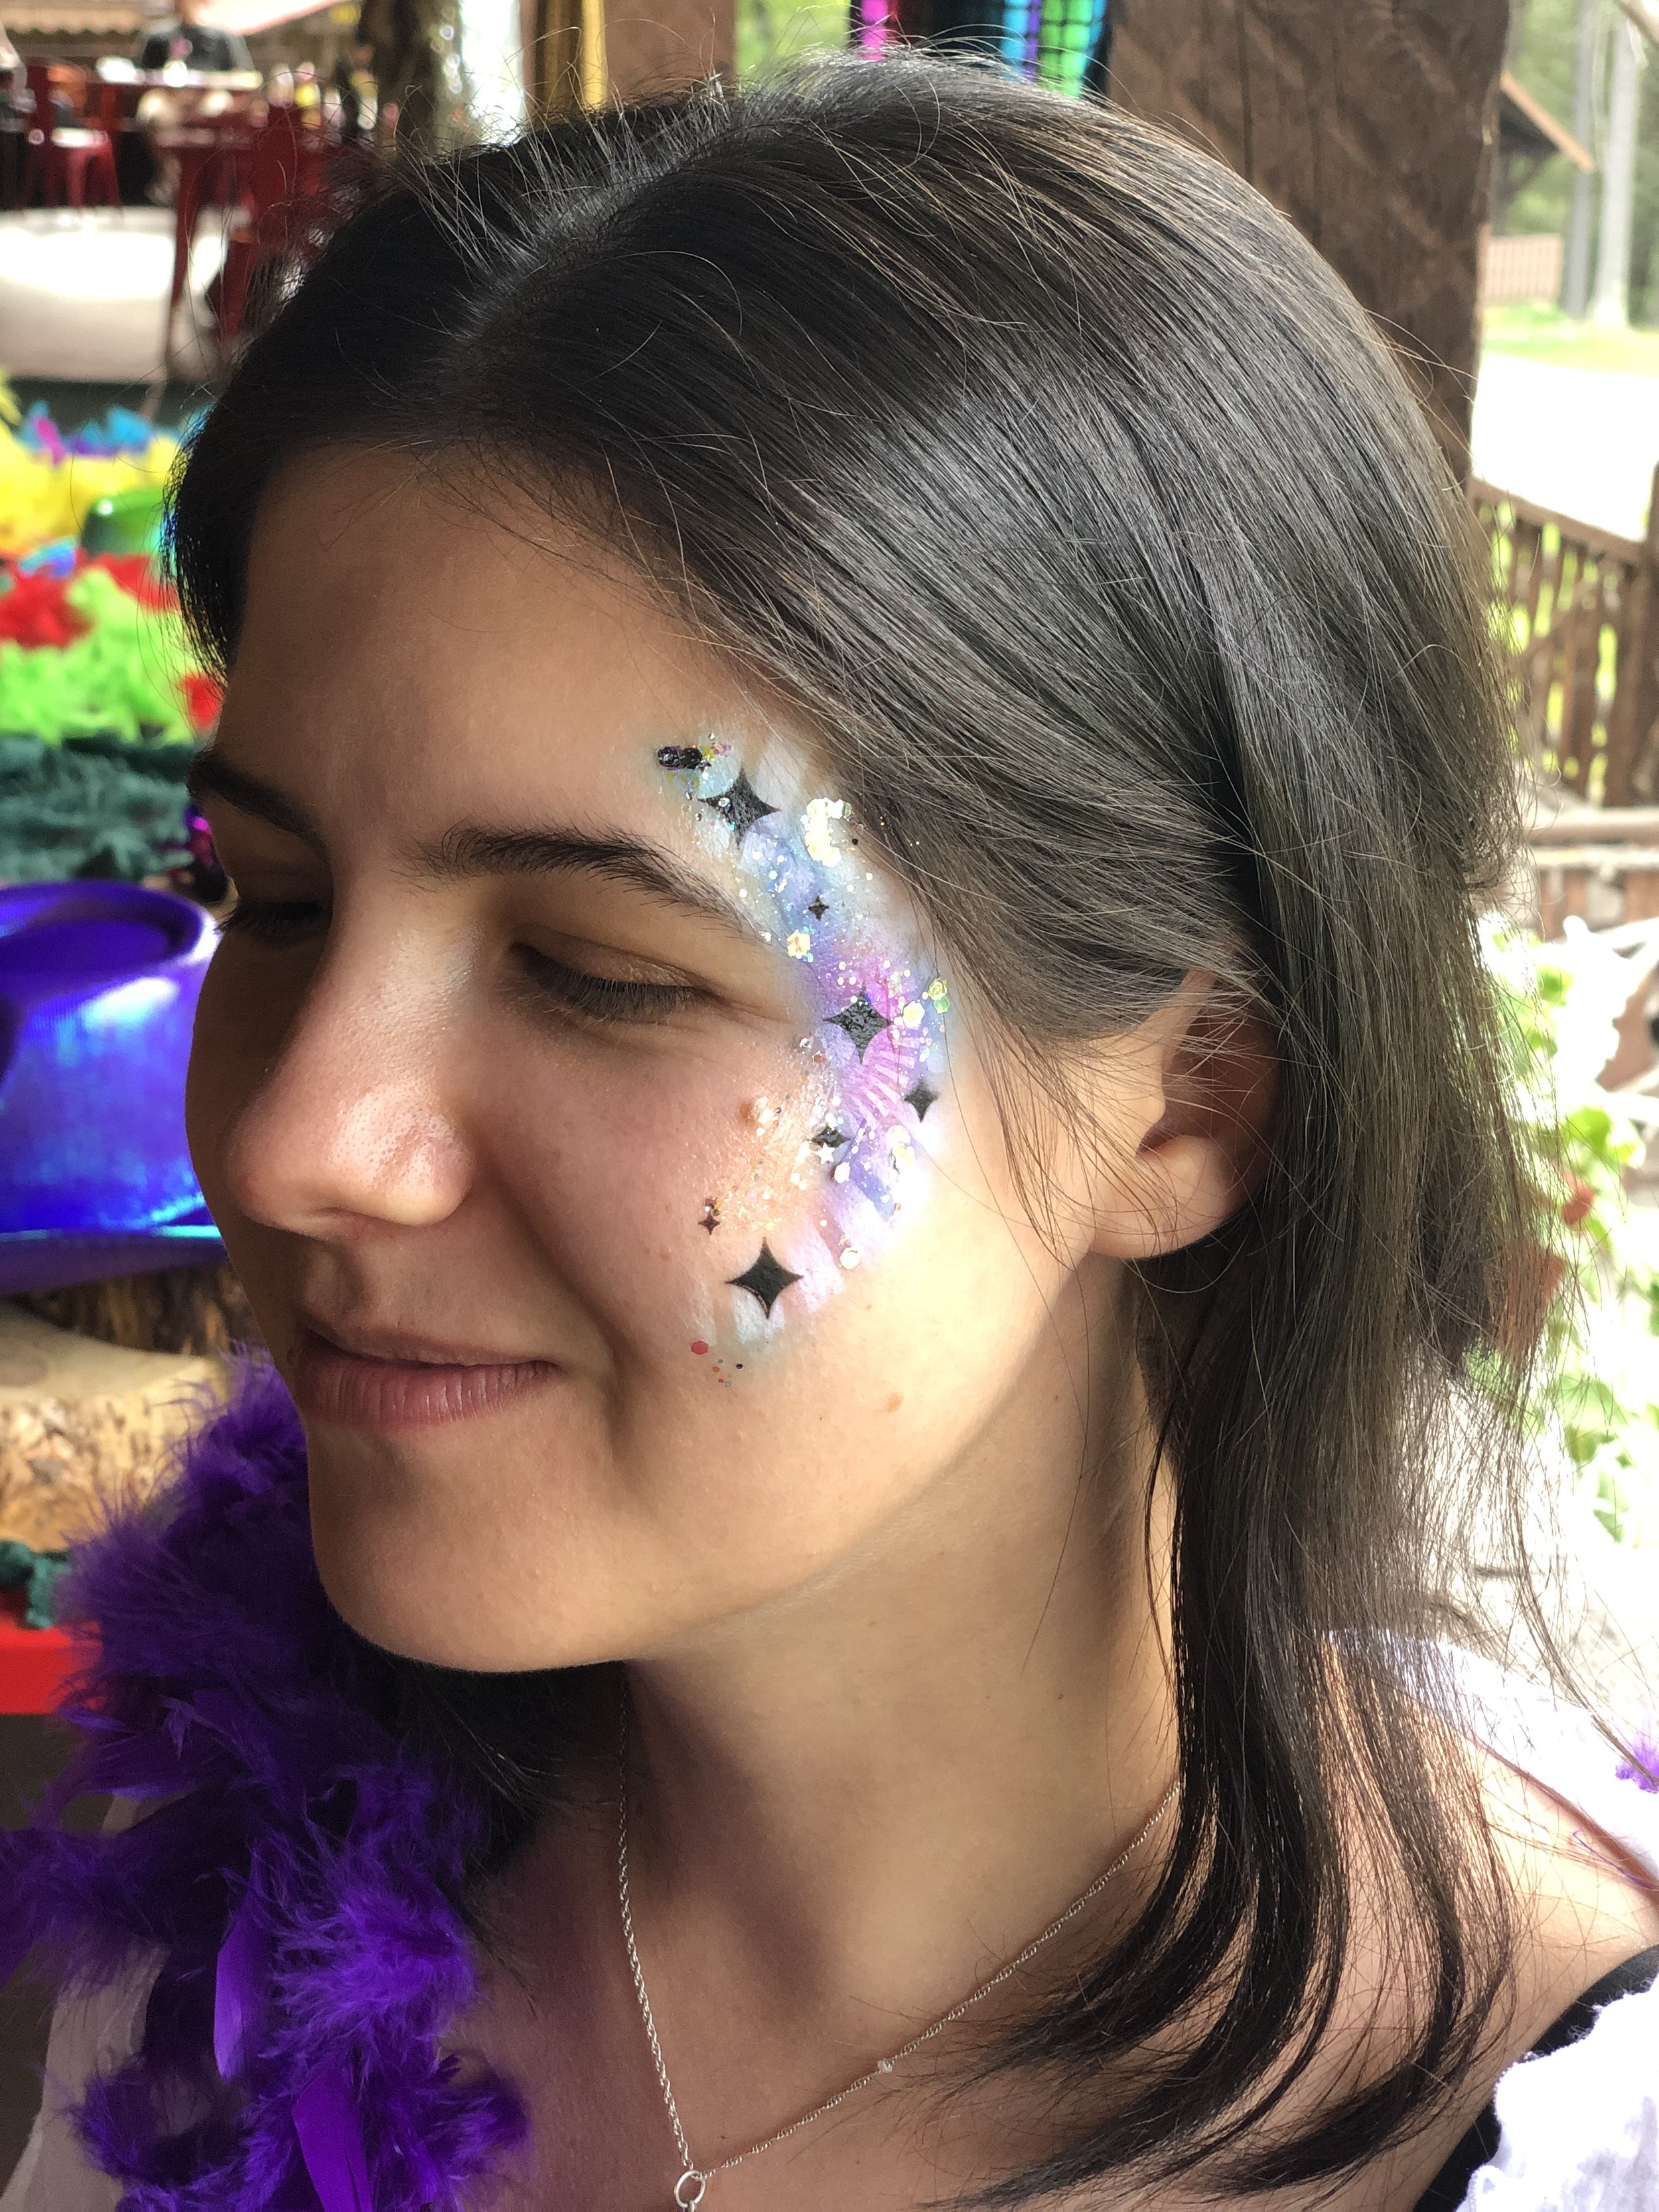 Airbrush Face Painting for Adults near New York City.JPG